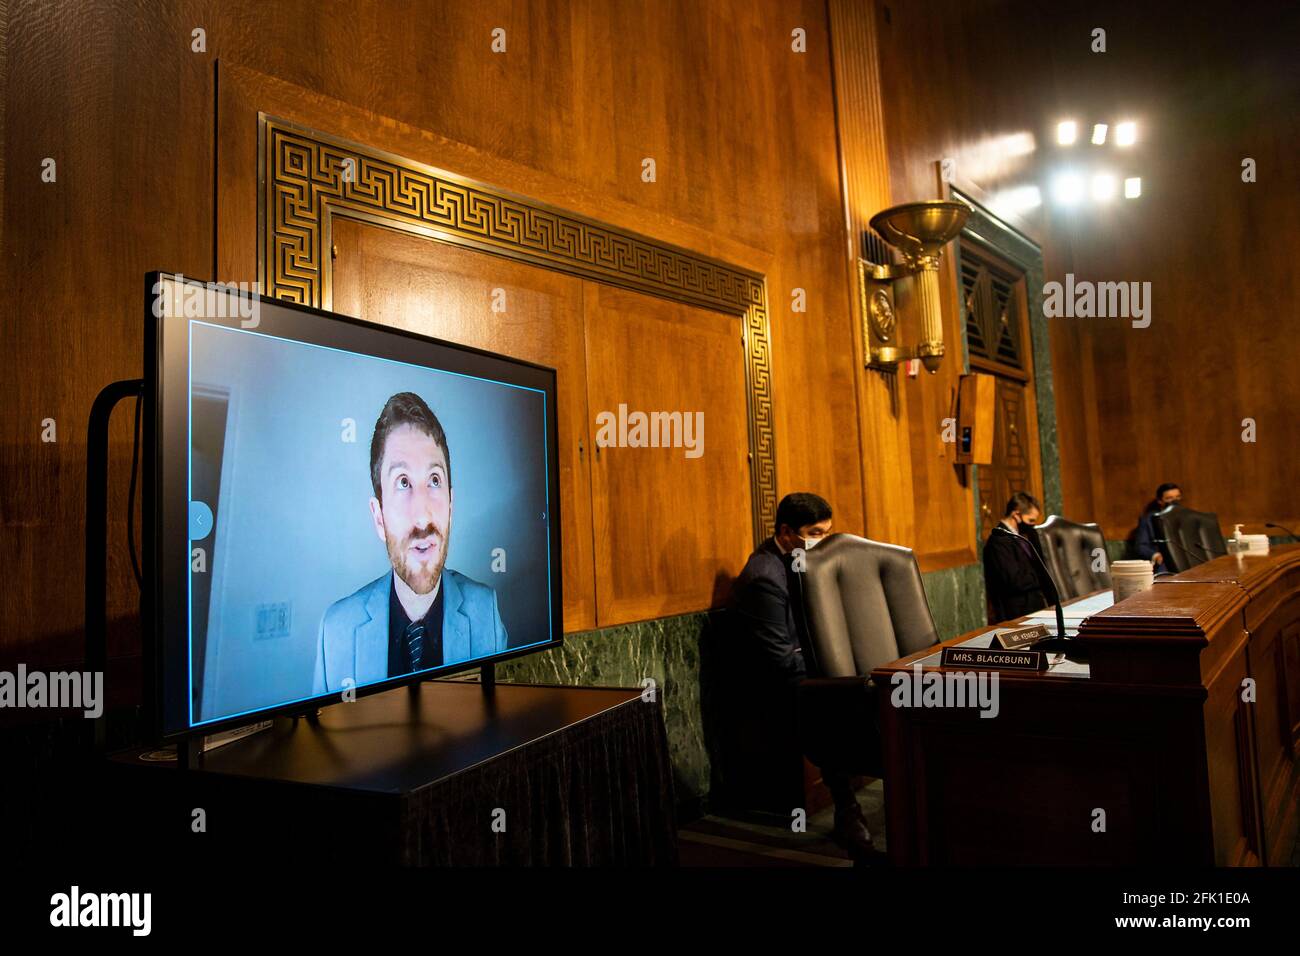 Tristan Harris, co-founder and president at the Center for Humane Technology, testifies virtually during a Senate Judiciary Subcommittee hearing in Washington, D.C., U.S., on Tuesday, April 27, 2021. The hearing is examining the effect social media companies' algorithms and design choices have on users and discourse. Photographer: Al Drago/Pool/Sipa USA Stock Photo